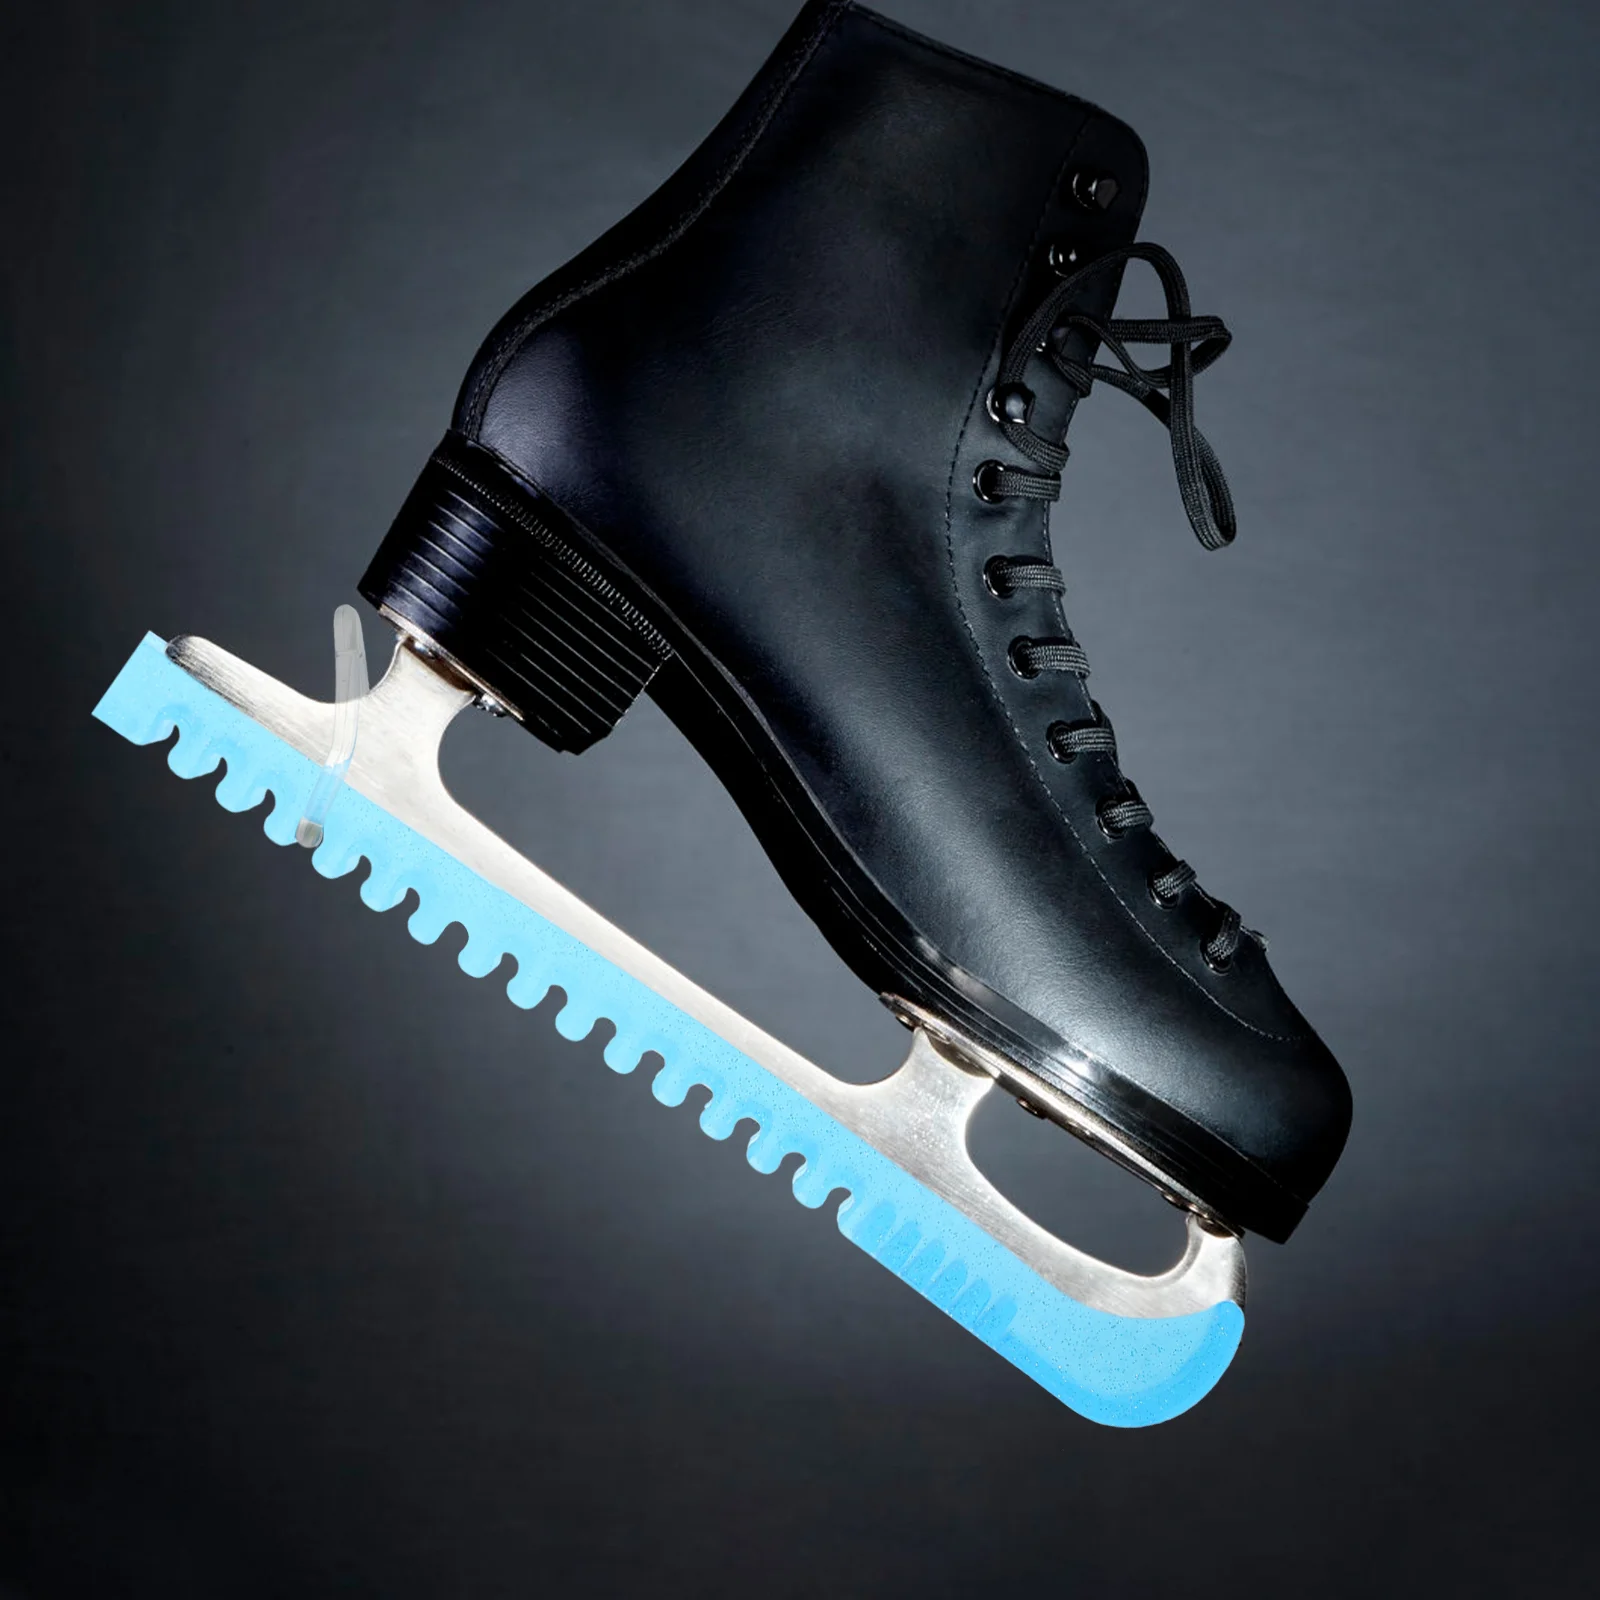 Ice Skates Guards Figure Skating Blade Accessory Blades Covers Shoes Protectors Convenient